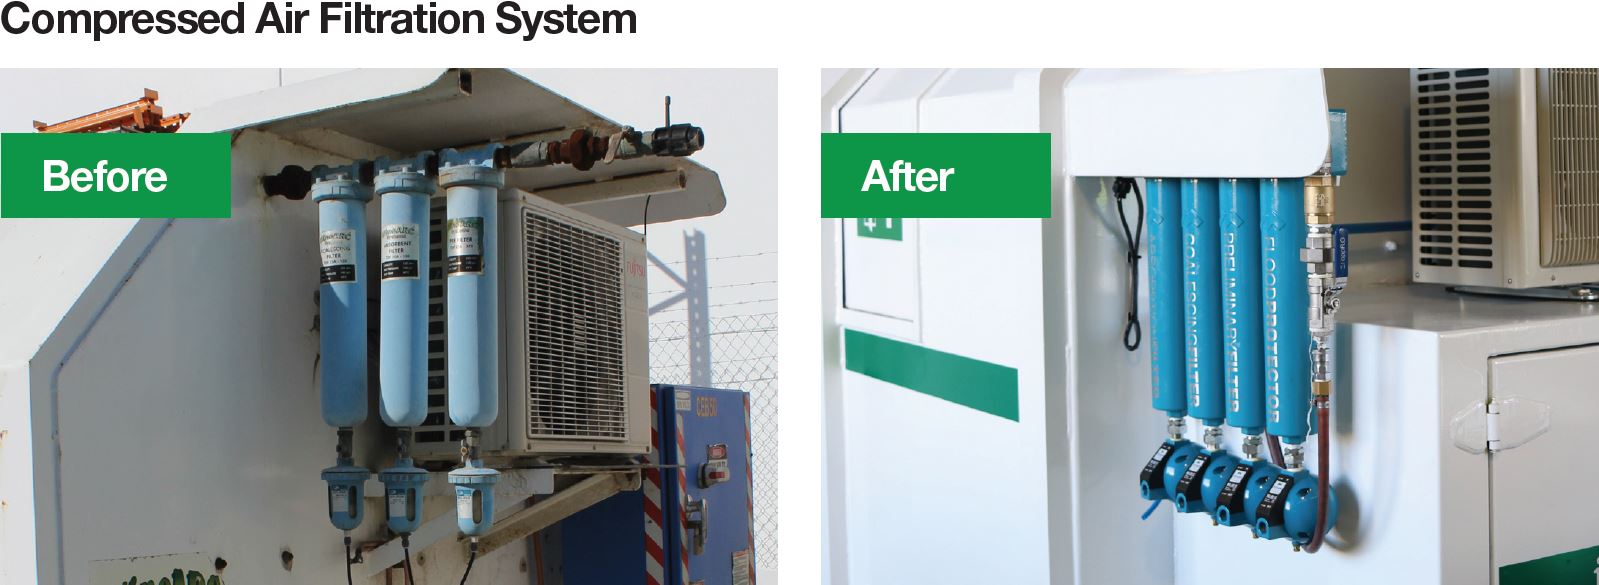 compressed air filtration system_chamber refurbishment